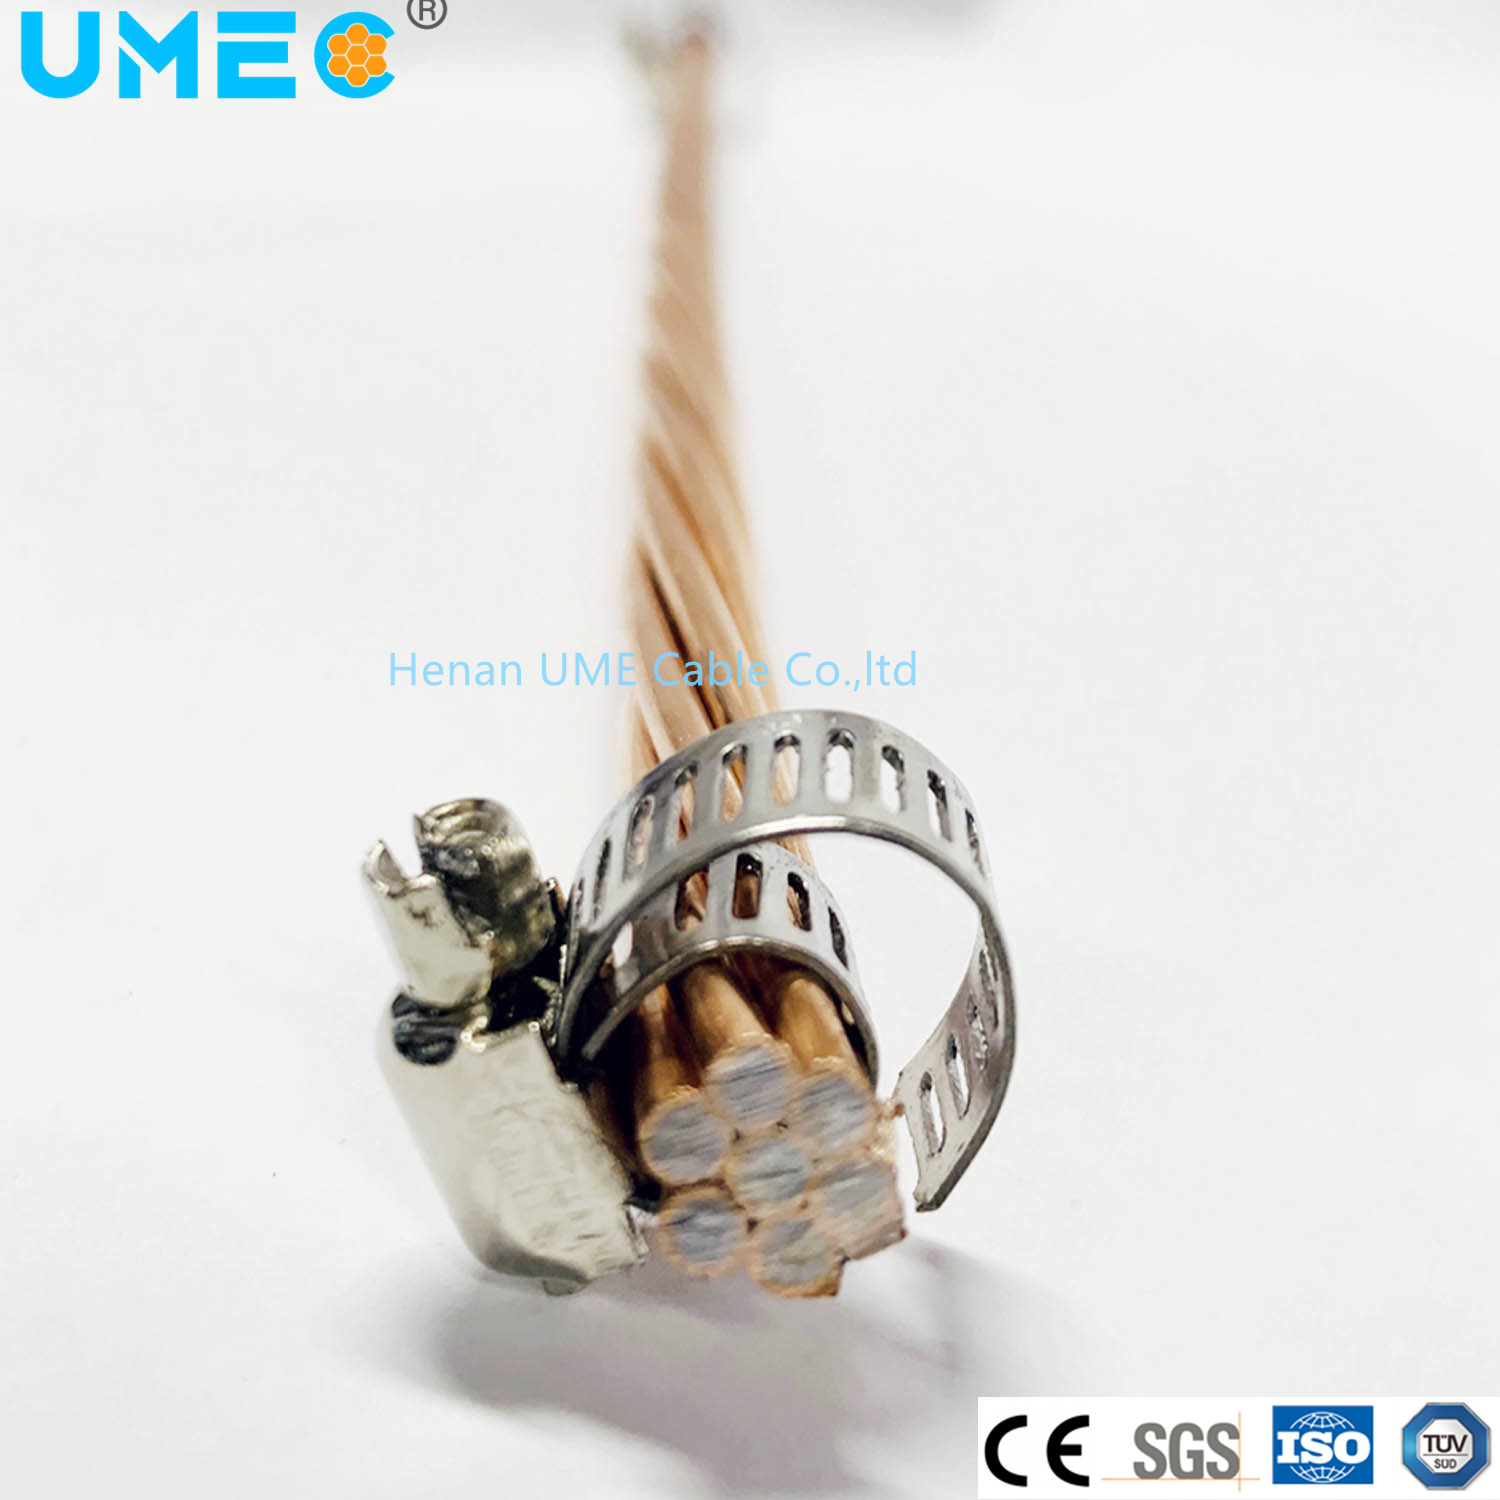 Making Insulated Wire 0.12mm 0.15mm-1.00mm Copper Clad Aluminum/Steel Magnesium CCS CCA CCAM Wire